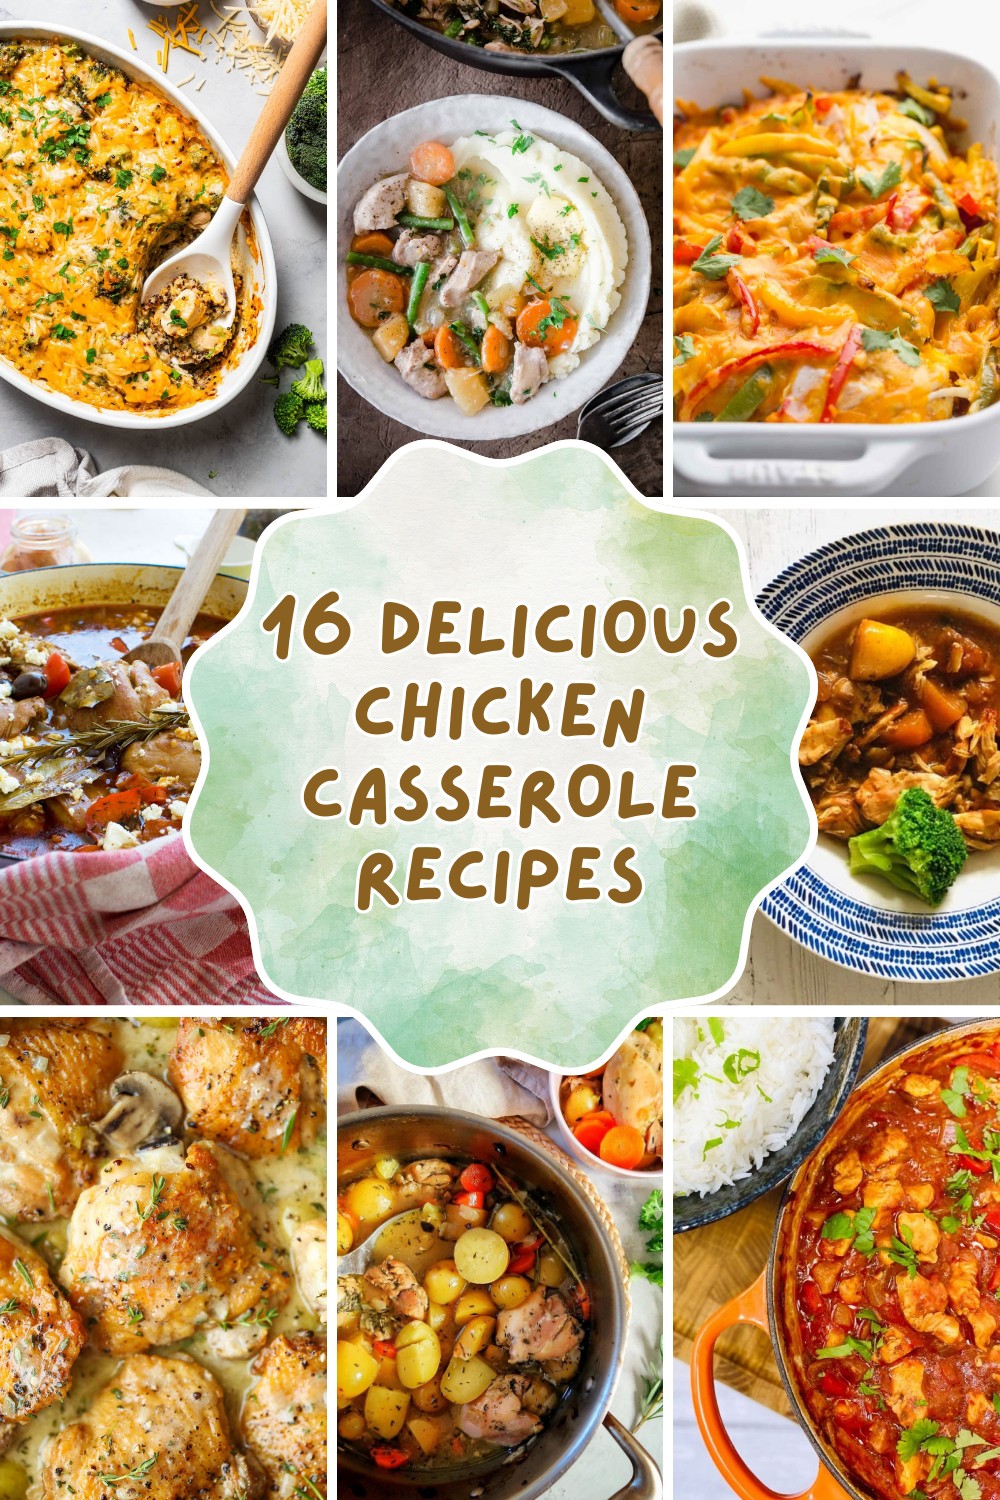 Discover the ultimate collection of chicken casserole recipes! From creamy and cheesy to savory and spicy, we've got something for every taste. Perfect for home cooks of all levels, these recipes are guaranteed to become your new favorites. Try them out and enjoy a delicious, comforting meal! #ChickenCasserole #HomeCooking #RecipeInspiration







